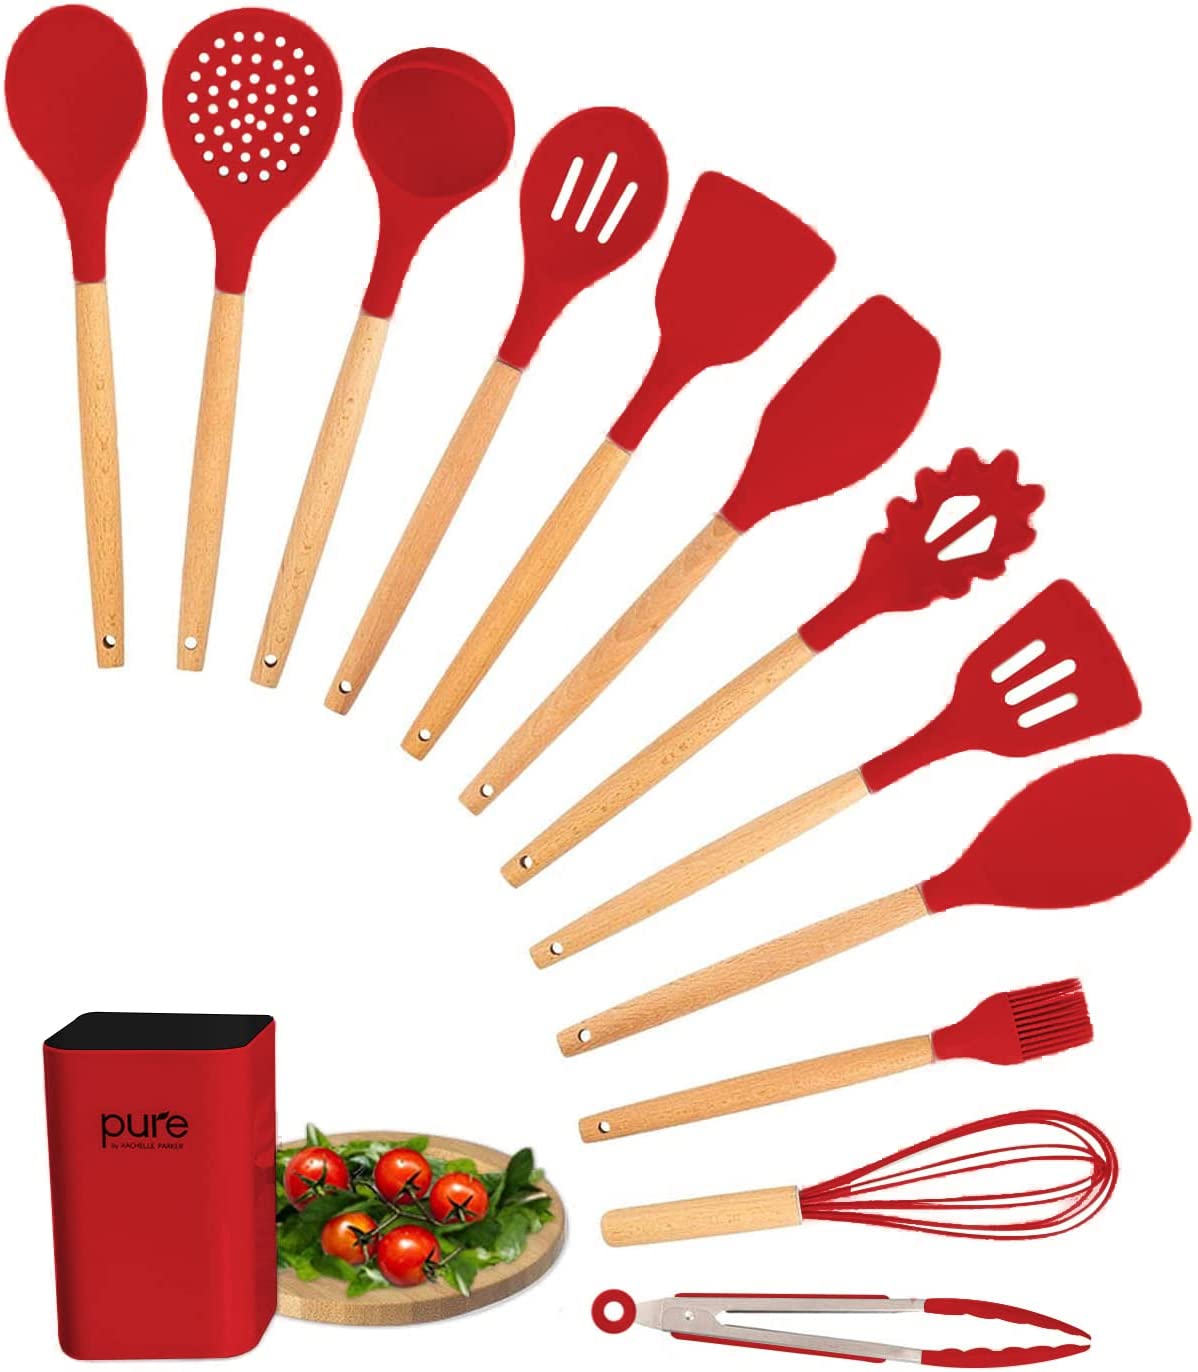 13pcs in 1 set metal handle kitchenware non stick accessories silicone  cooking kitchen utensil set tools with holder box